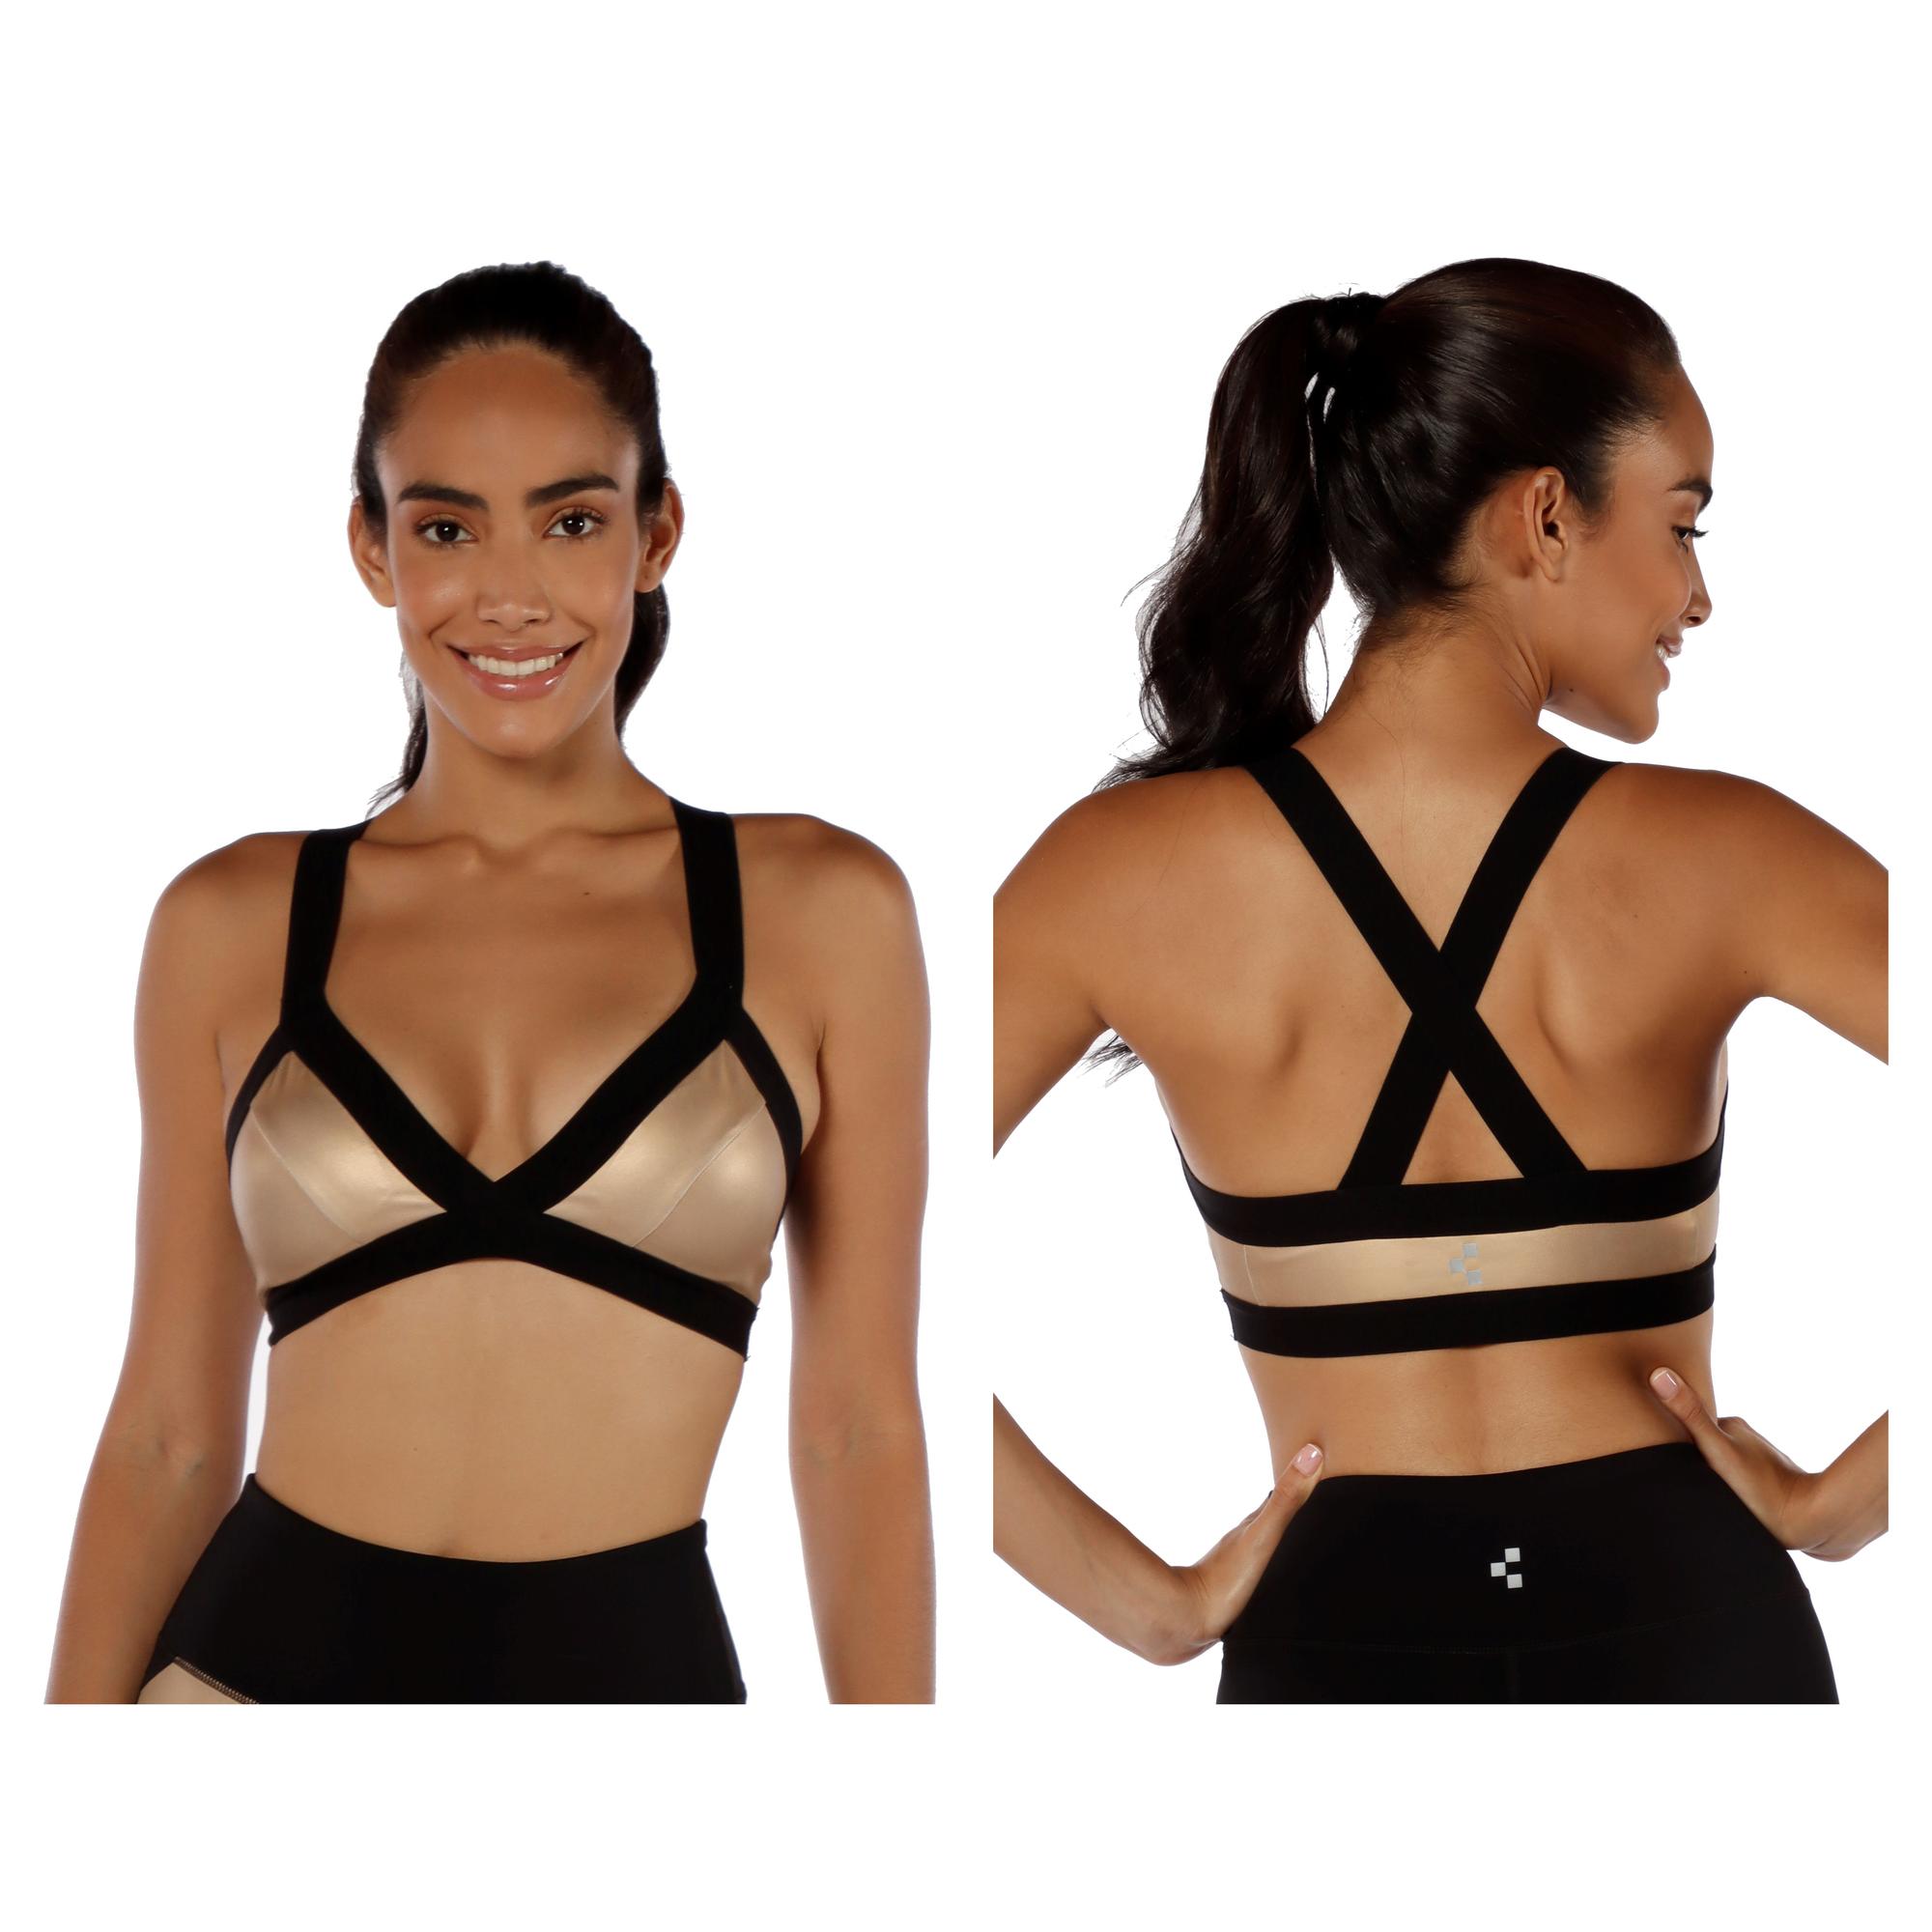 SPORTS BRA WITH REMOVABLE CUP - 302-0400293